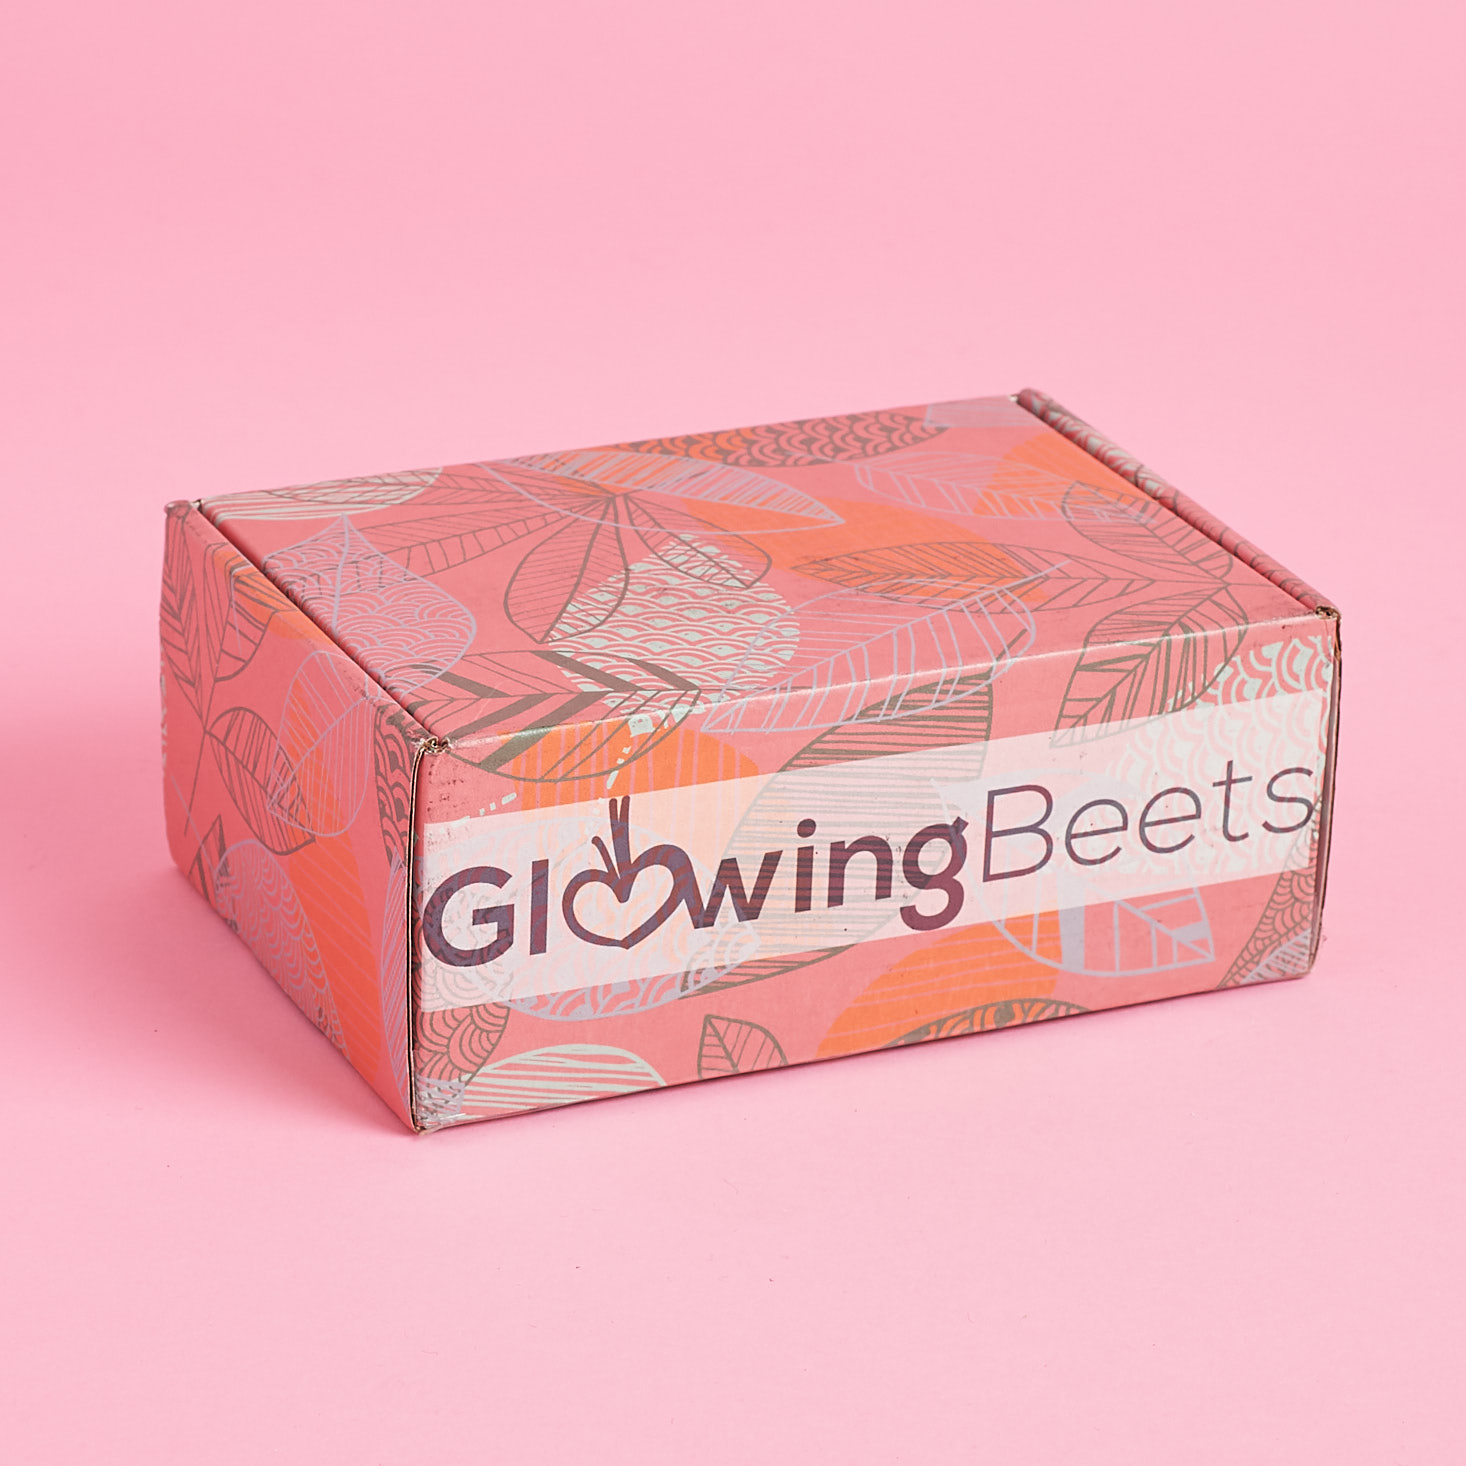 Glowing Beets Subscription Box Review – October 2017